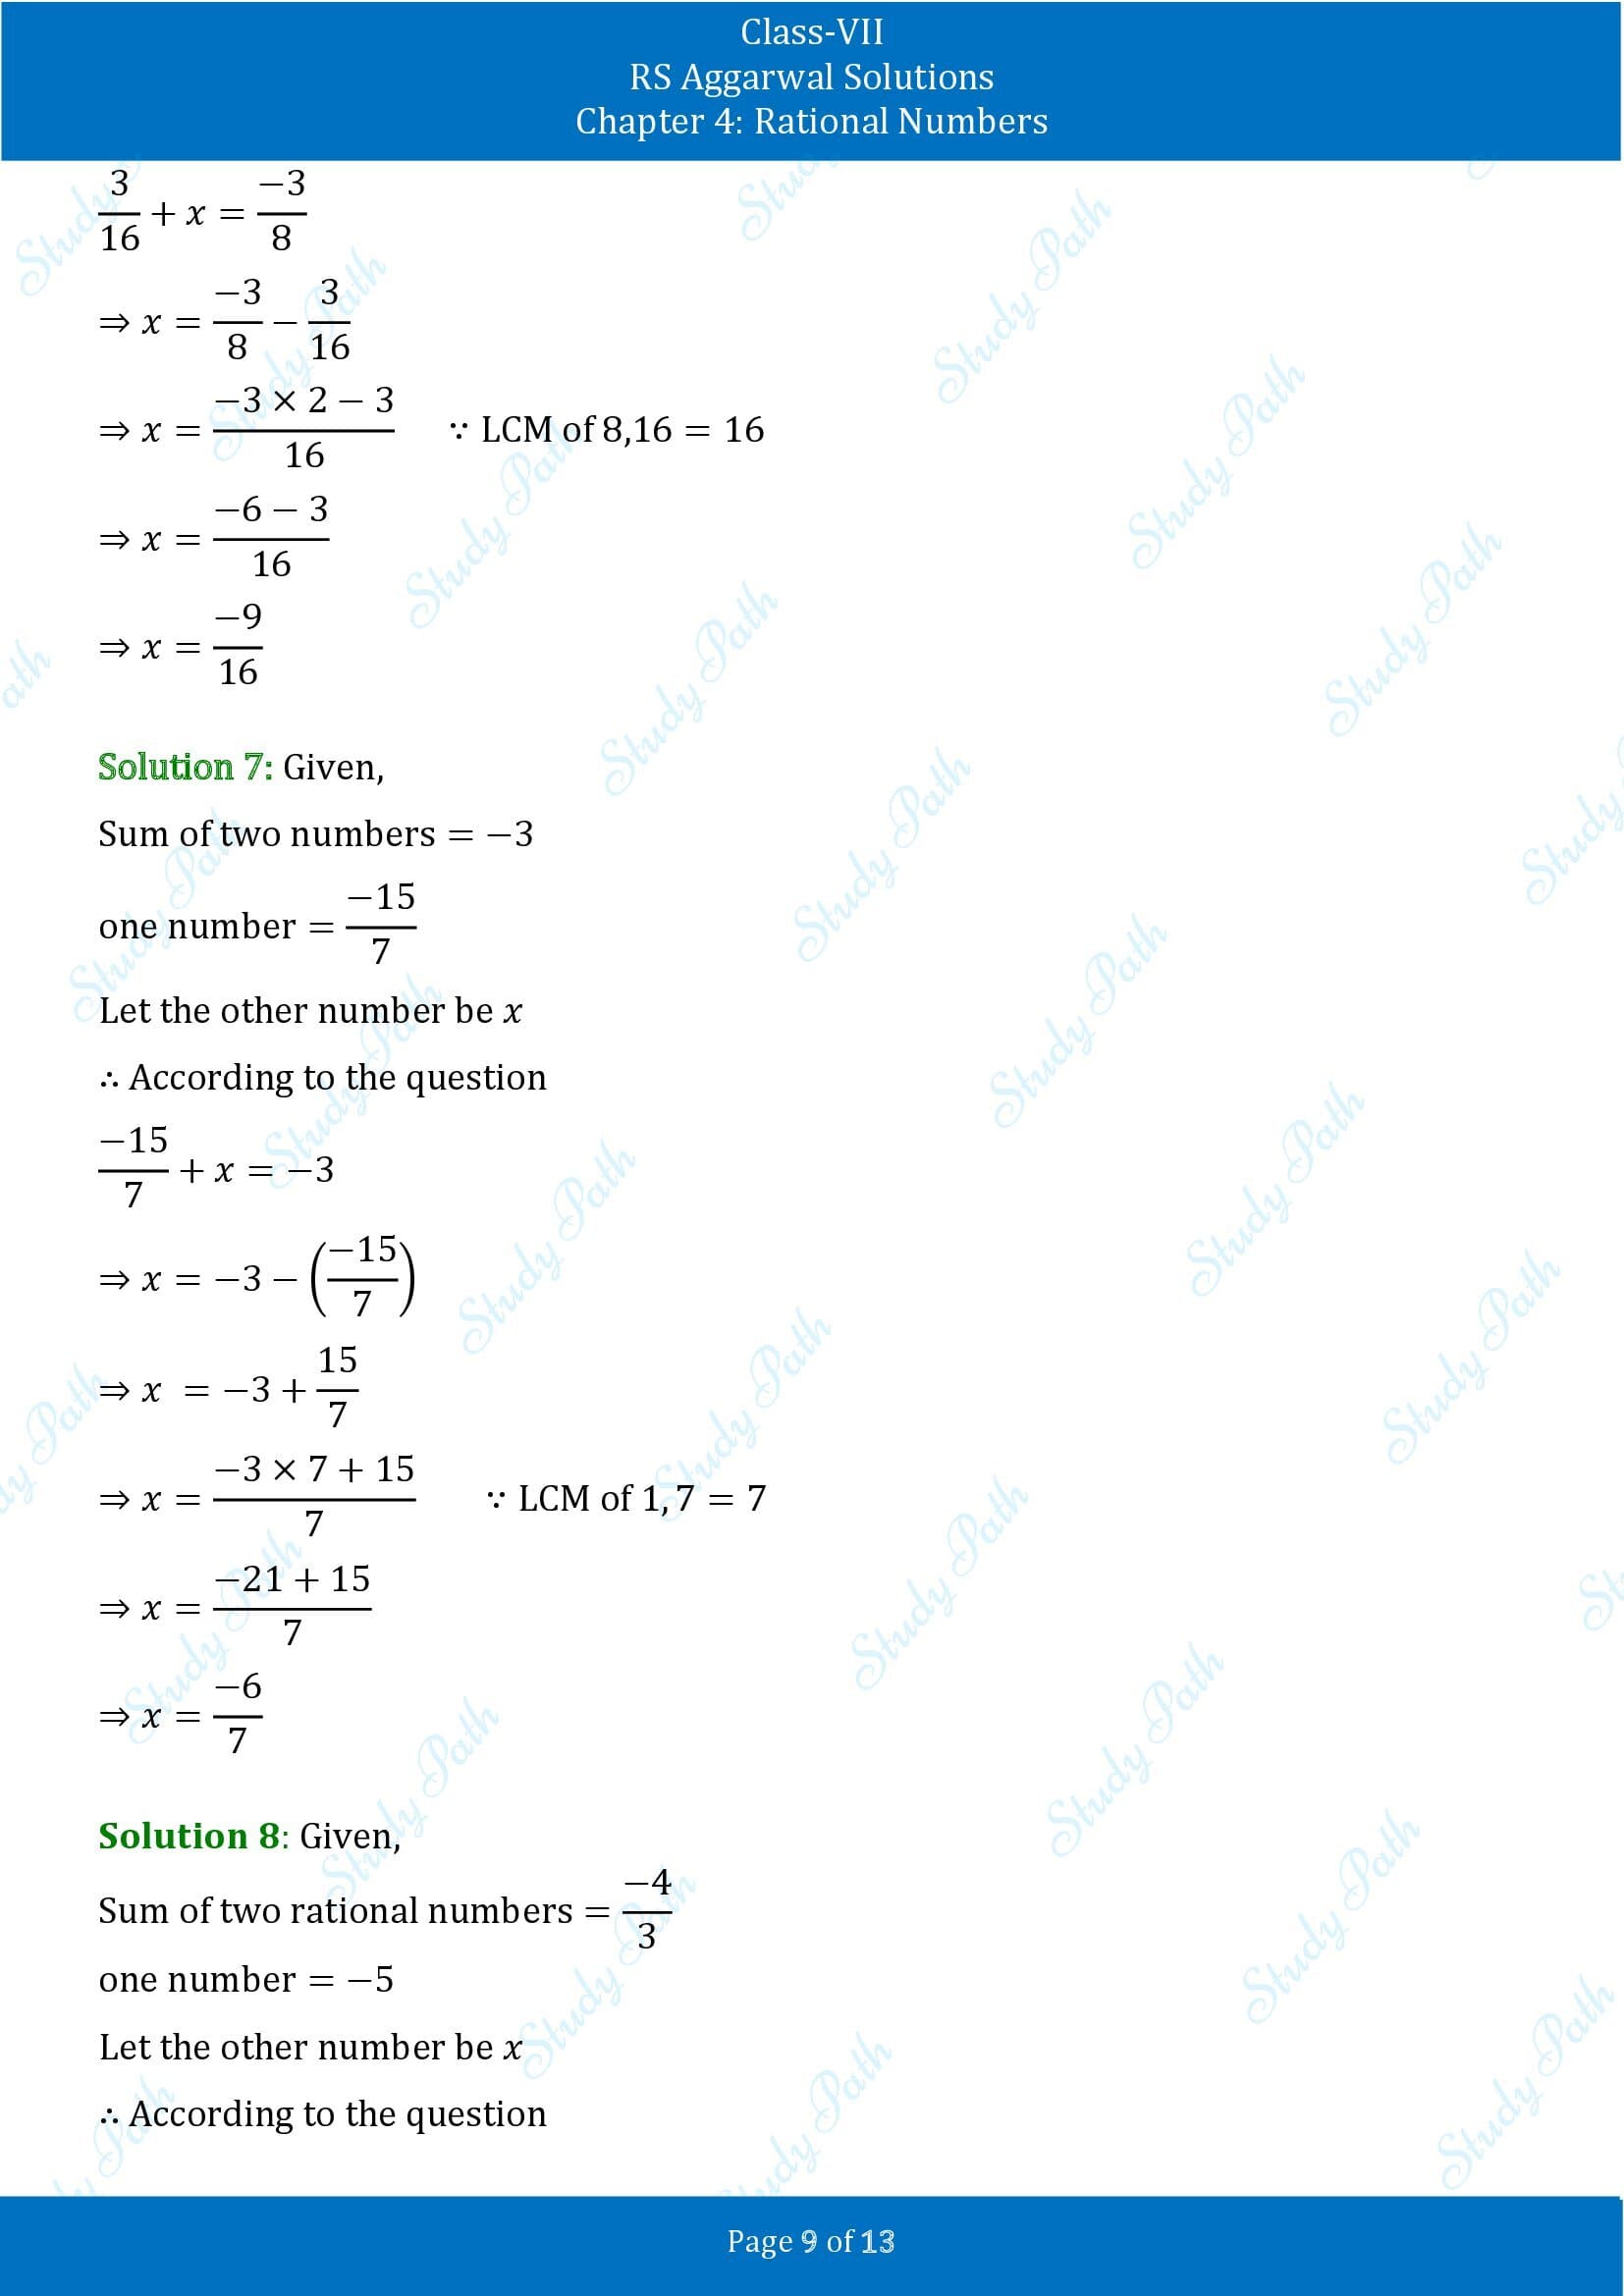 RS Aggarwal Solutions Class 7 Chapter 4 Rational Numbers Exercise 4D 00009